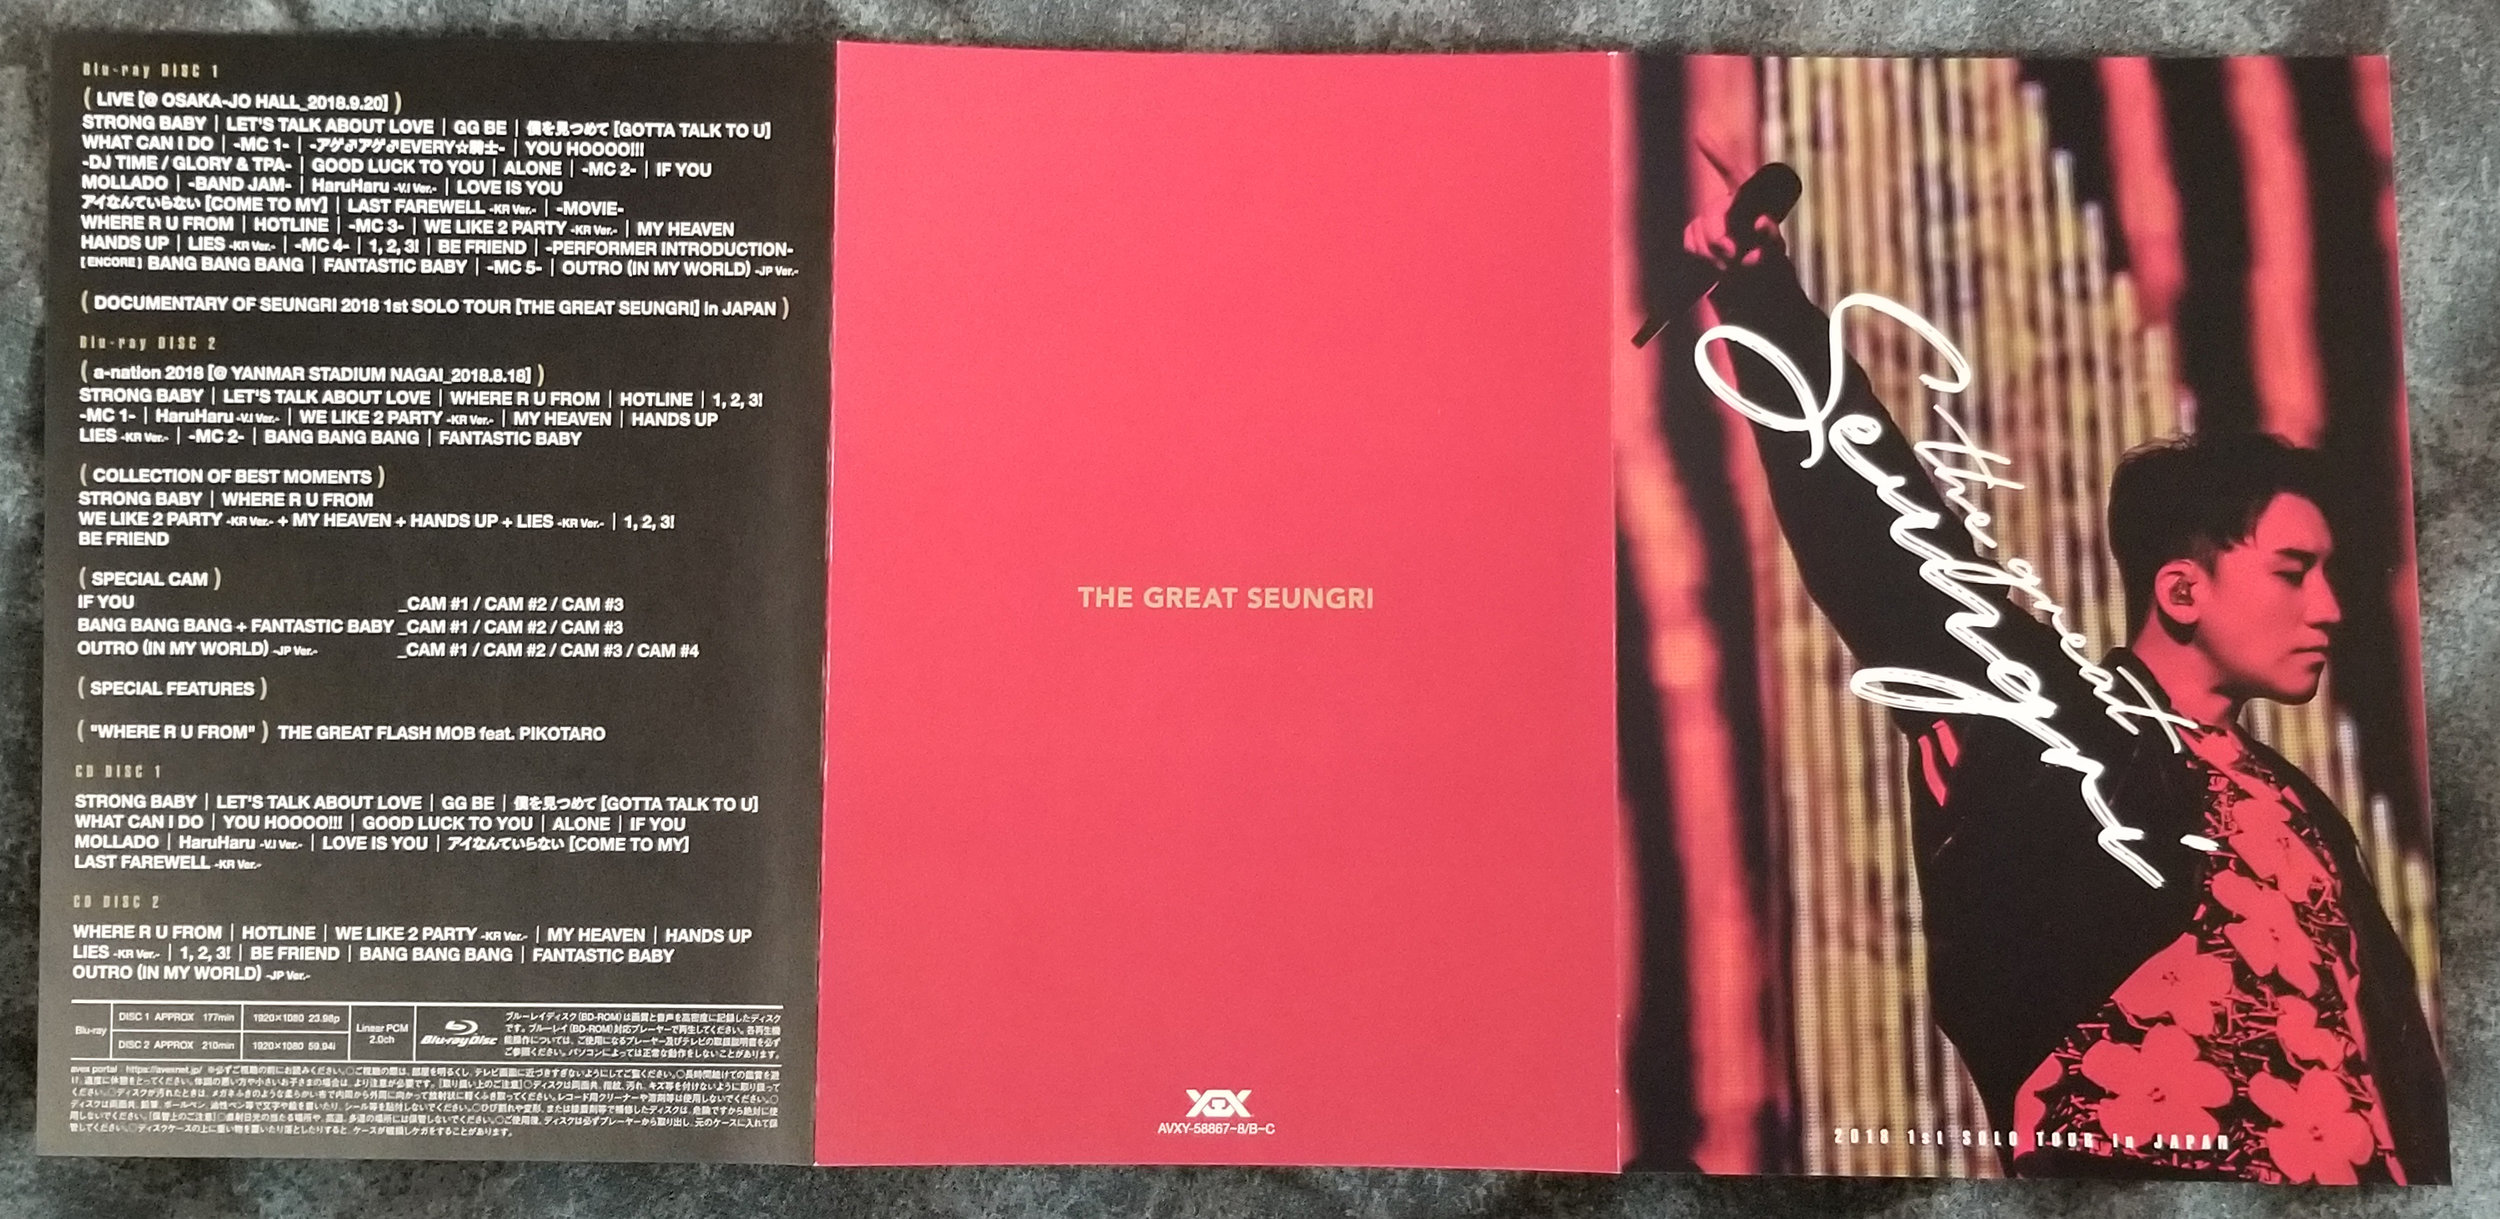 2019 (Release) - 2018 The Great Seungri Tour (Japan) - Deluxe Blu-ray ...